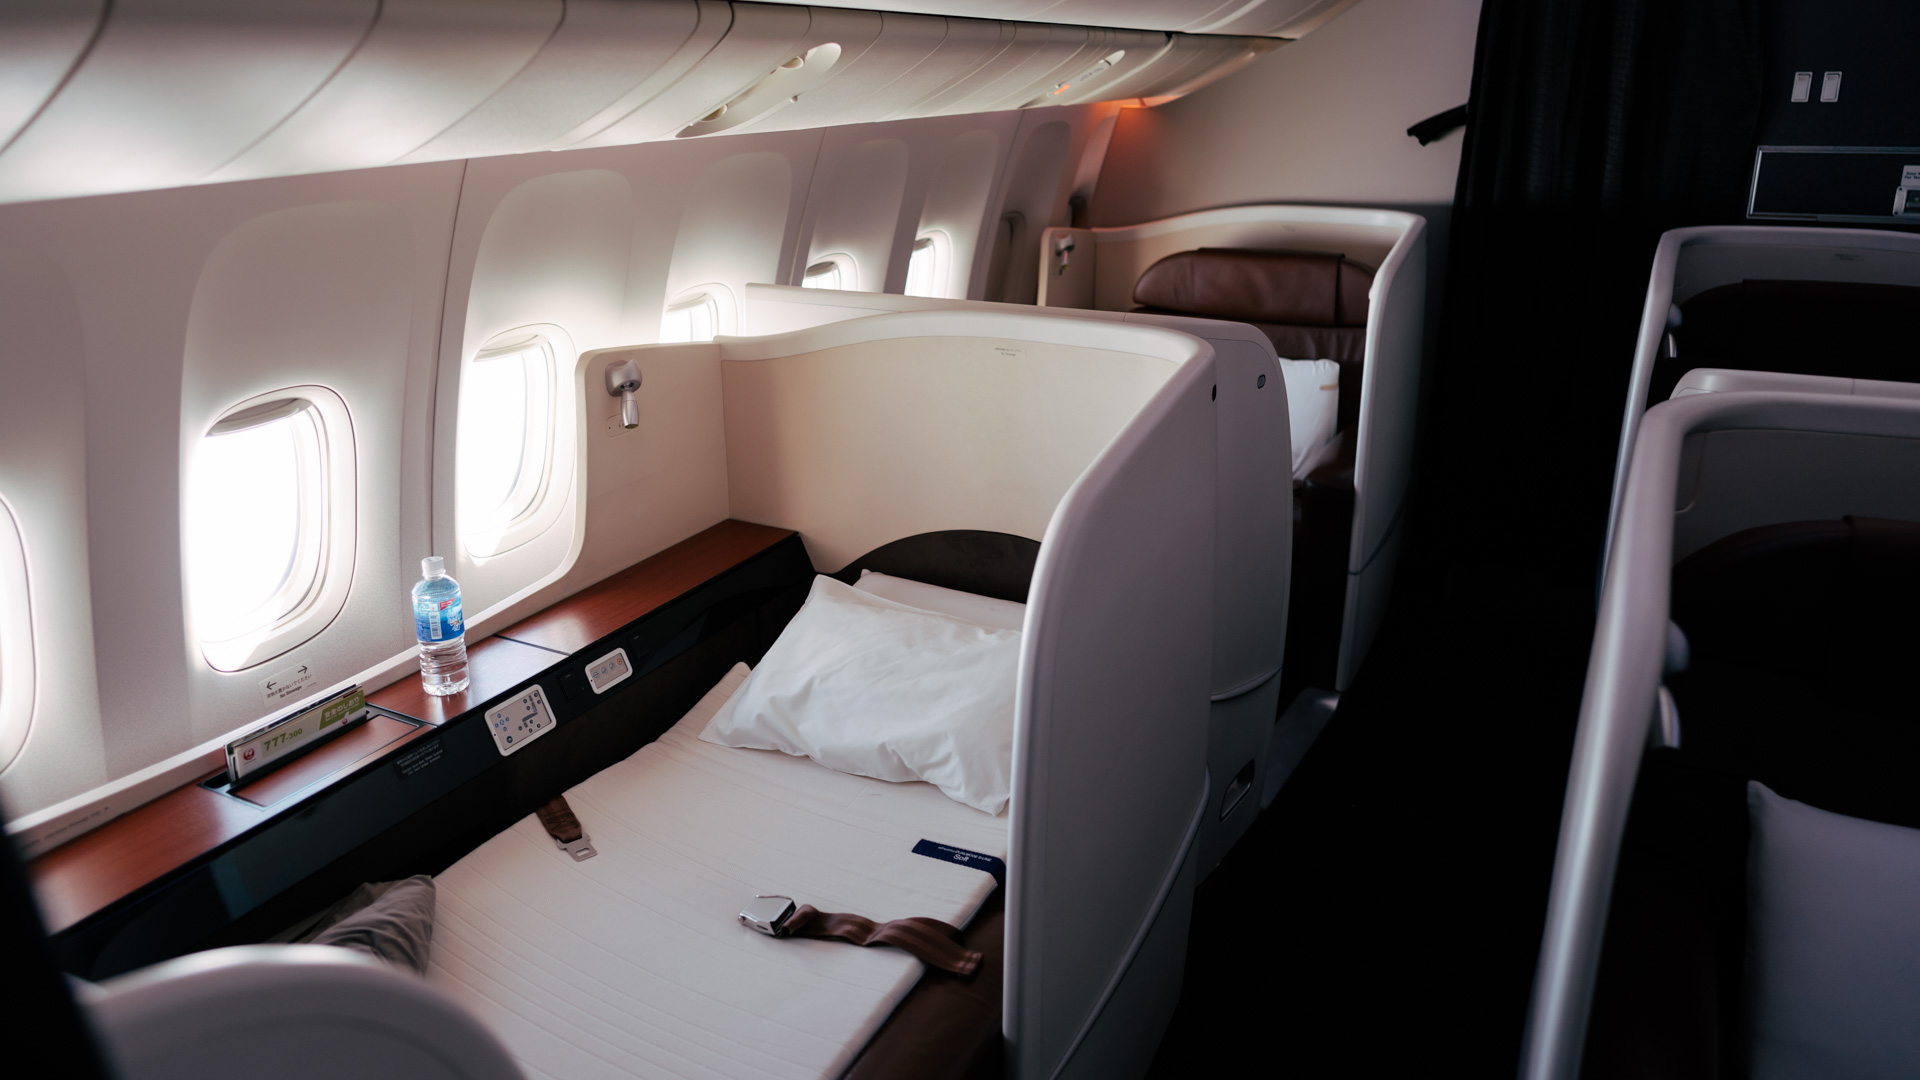 Japan Airlines Boeing 777 First Class bed